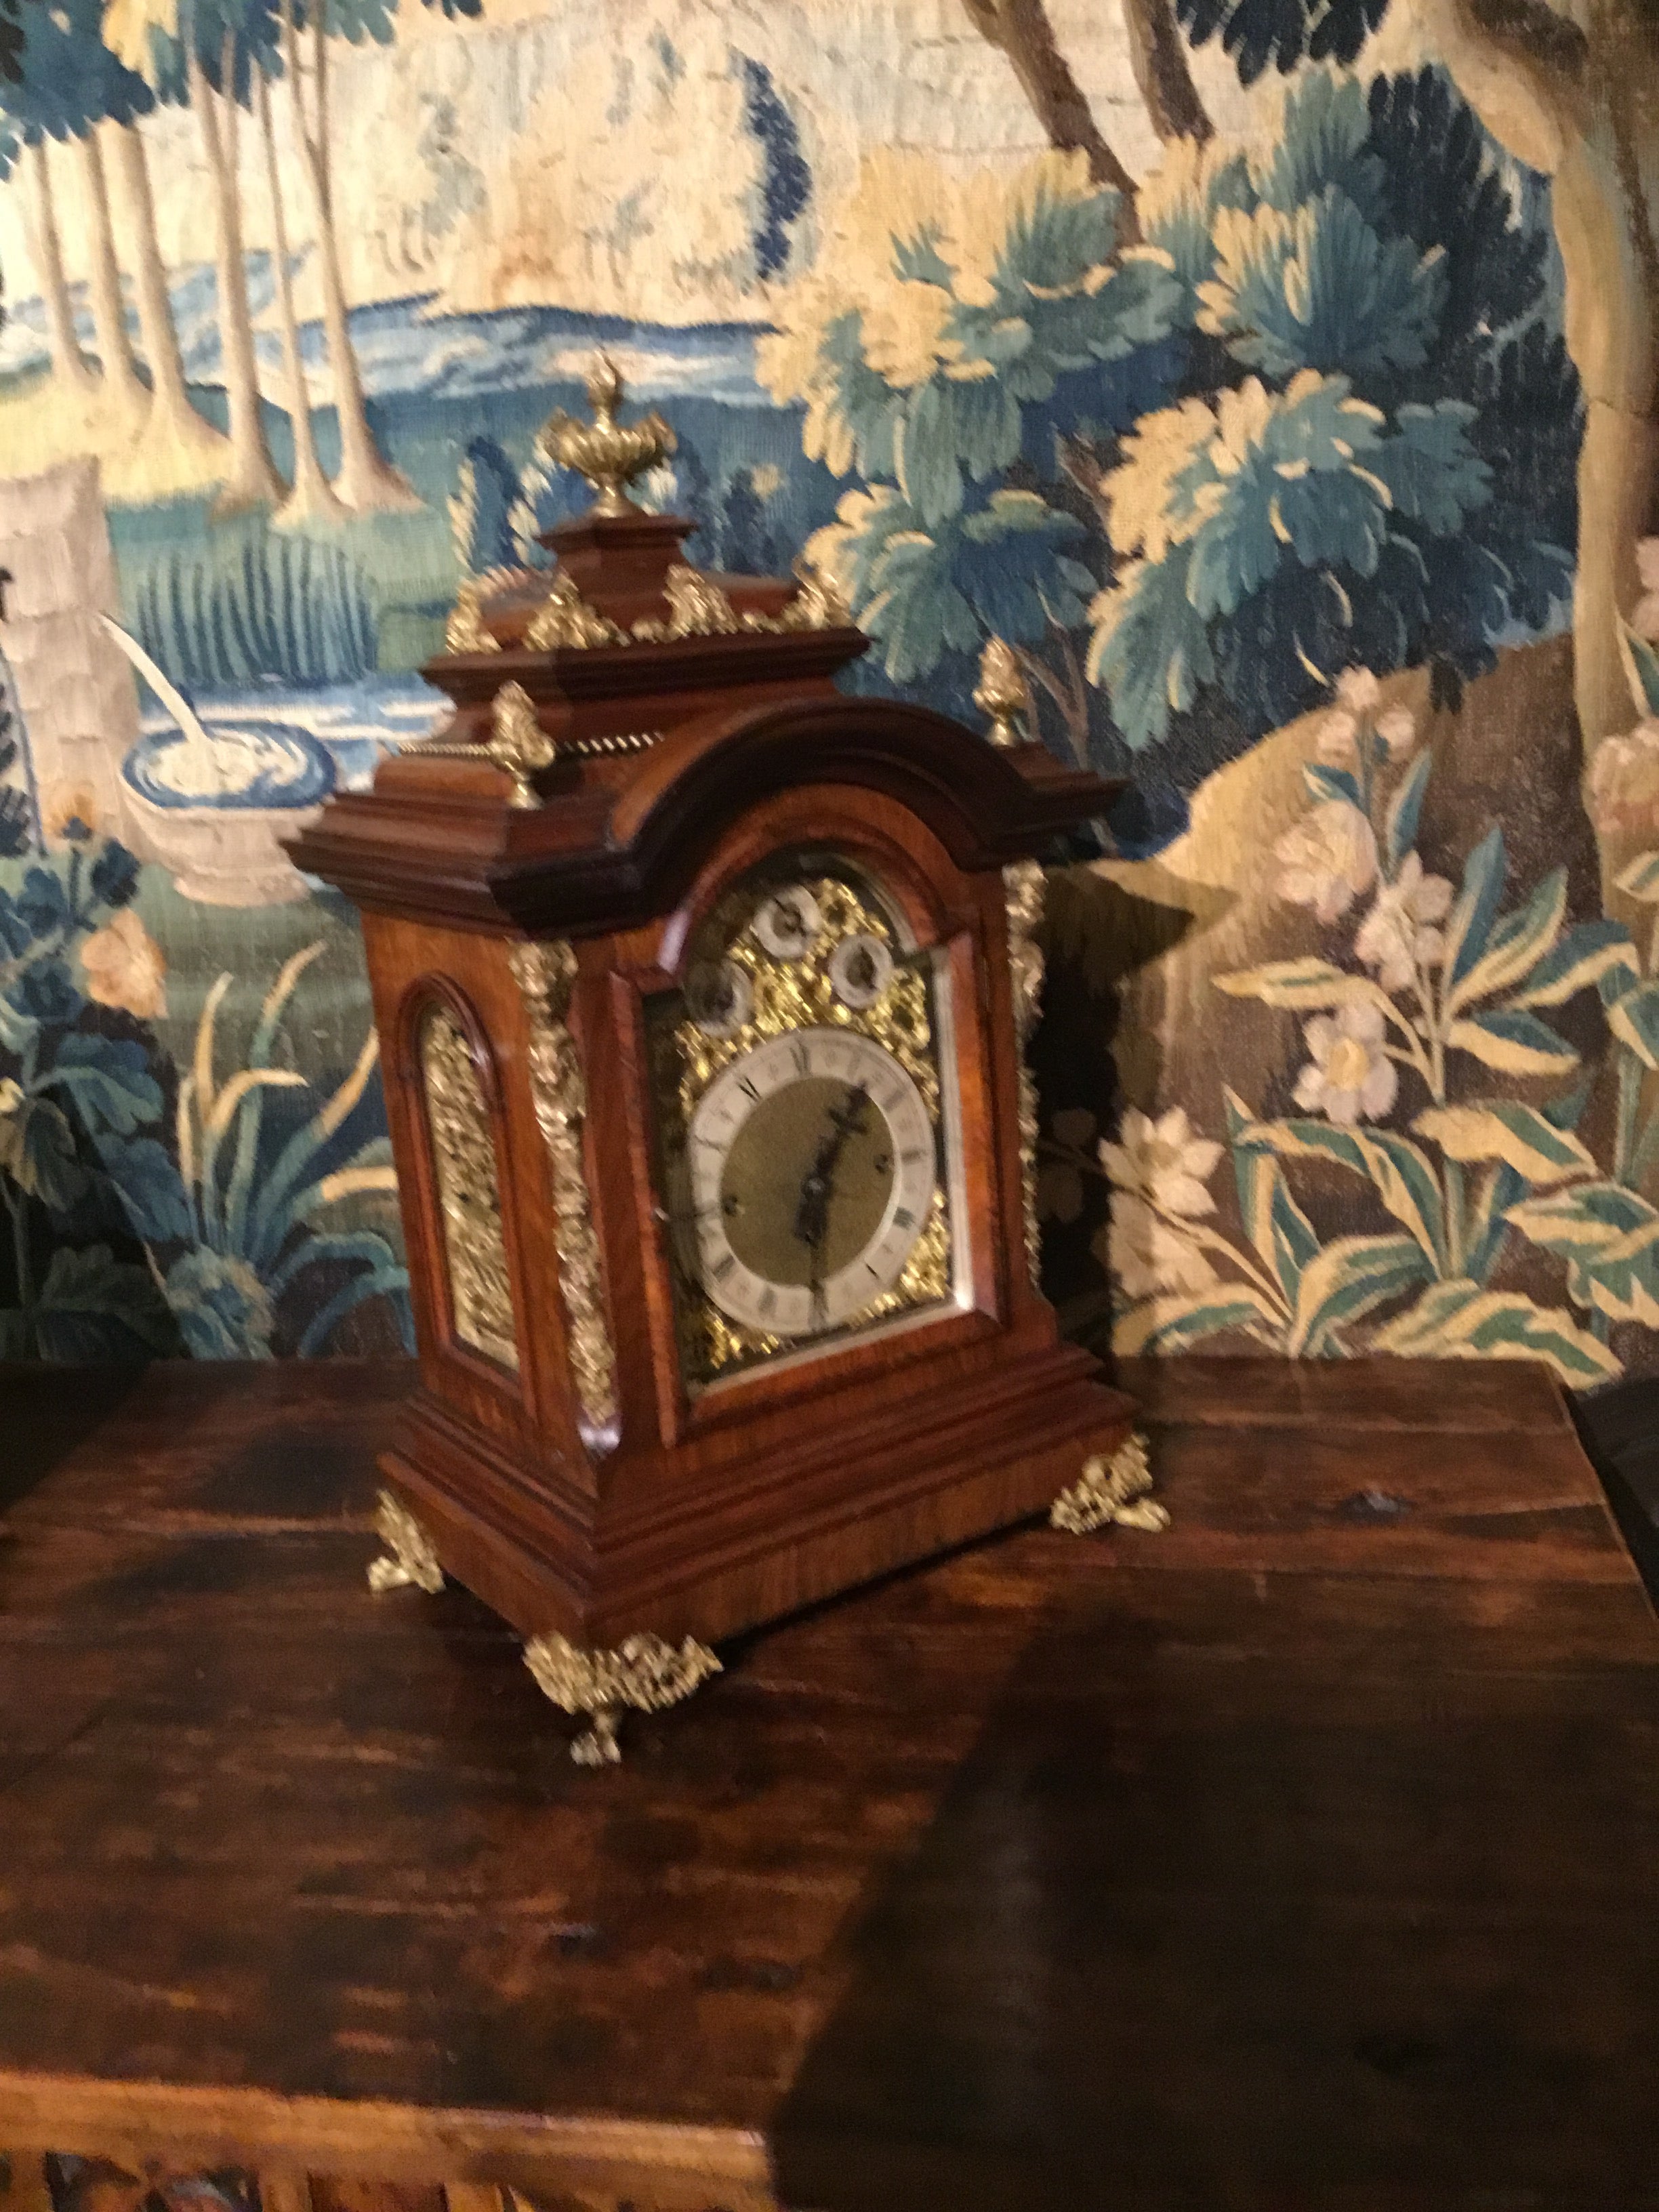 Very handsome walnut clock with ormolu mounts on the sides, front corners and paw feet.
Urn type finials grace the top center and top corners. Beveled glass front opening to a face
With Roman numerals. Has original key and pendulum.